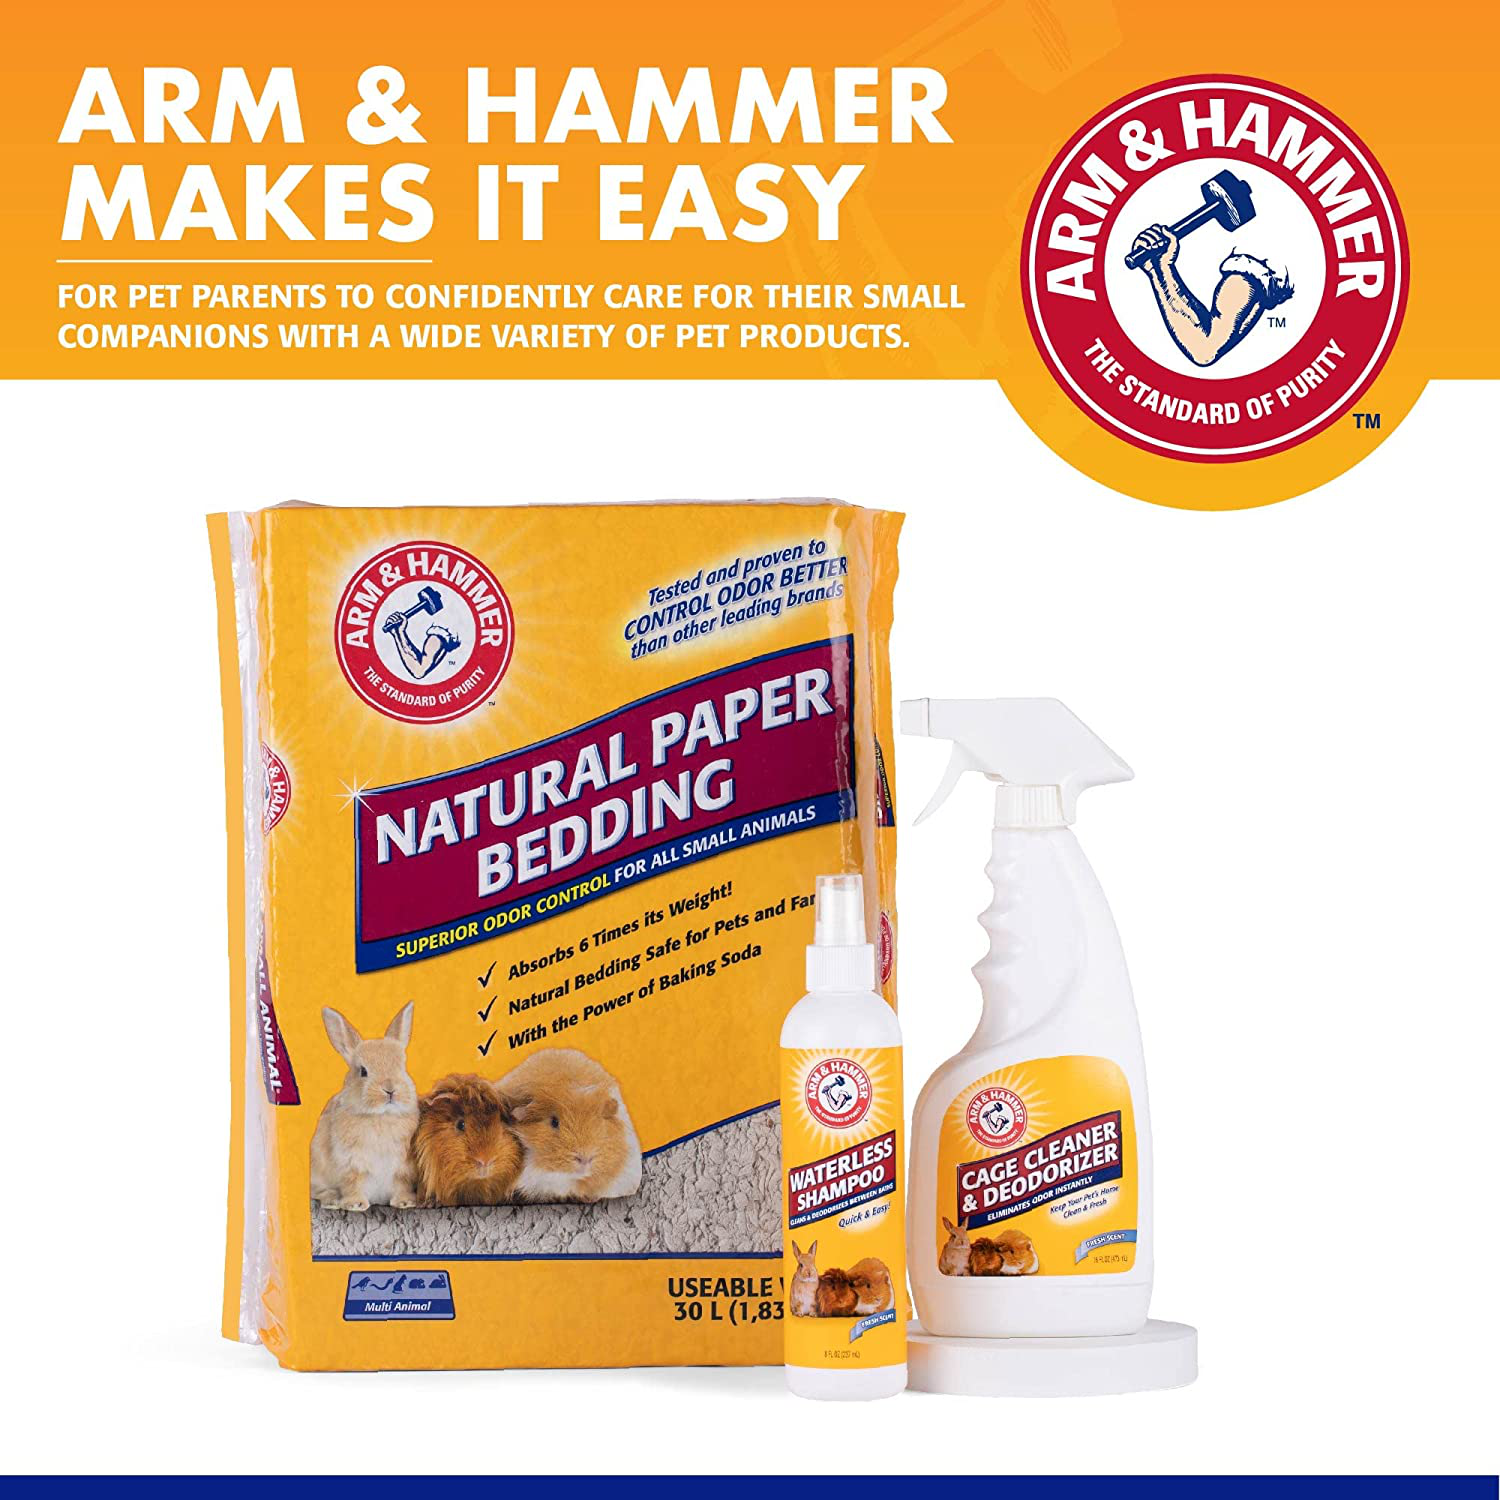 Arm & Hammer for Pets Super Absorbent Cage Liners for Guinea Pigs, Hamsters, Rabbits - Best Cage Liners for Small Animals, 7 Count - Small Animal Pet Products, Guinea Pig Pads, Guinea Pig Cage Liners